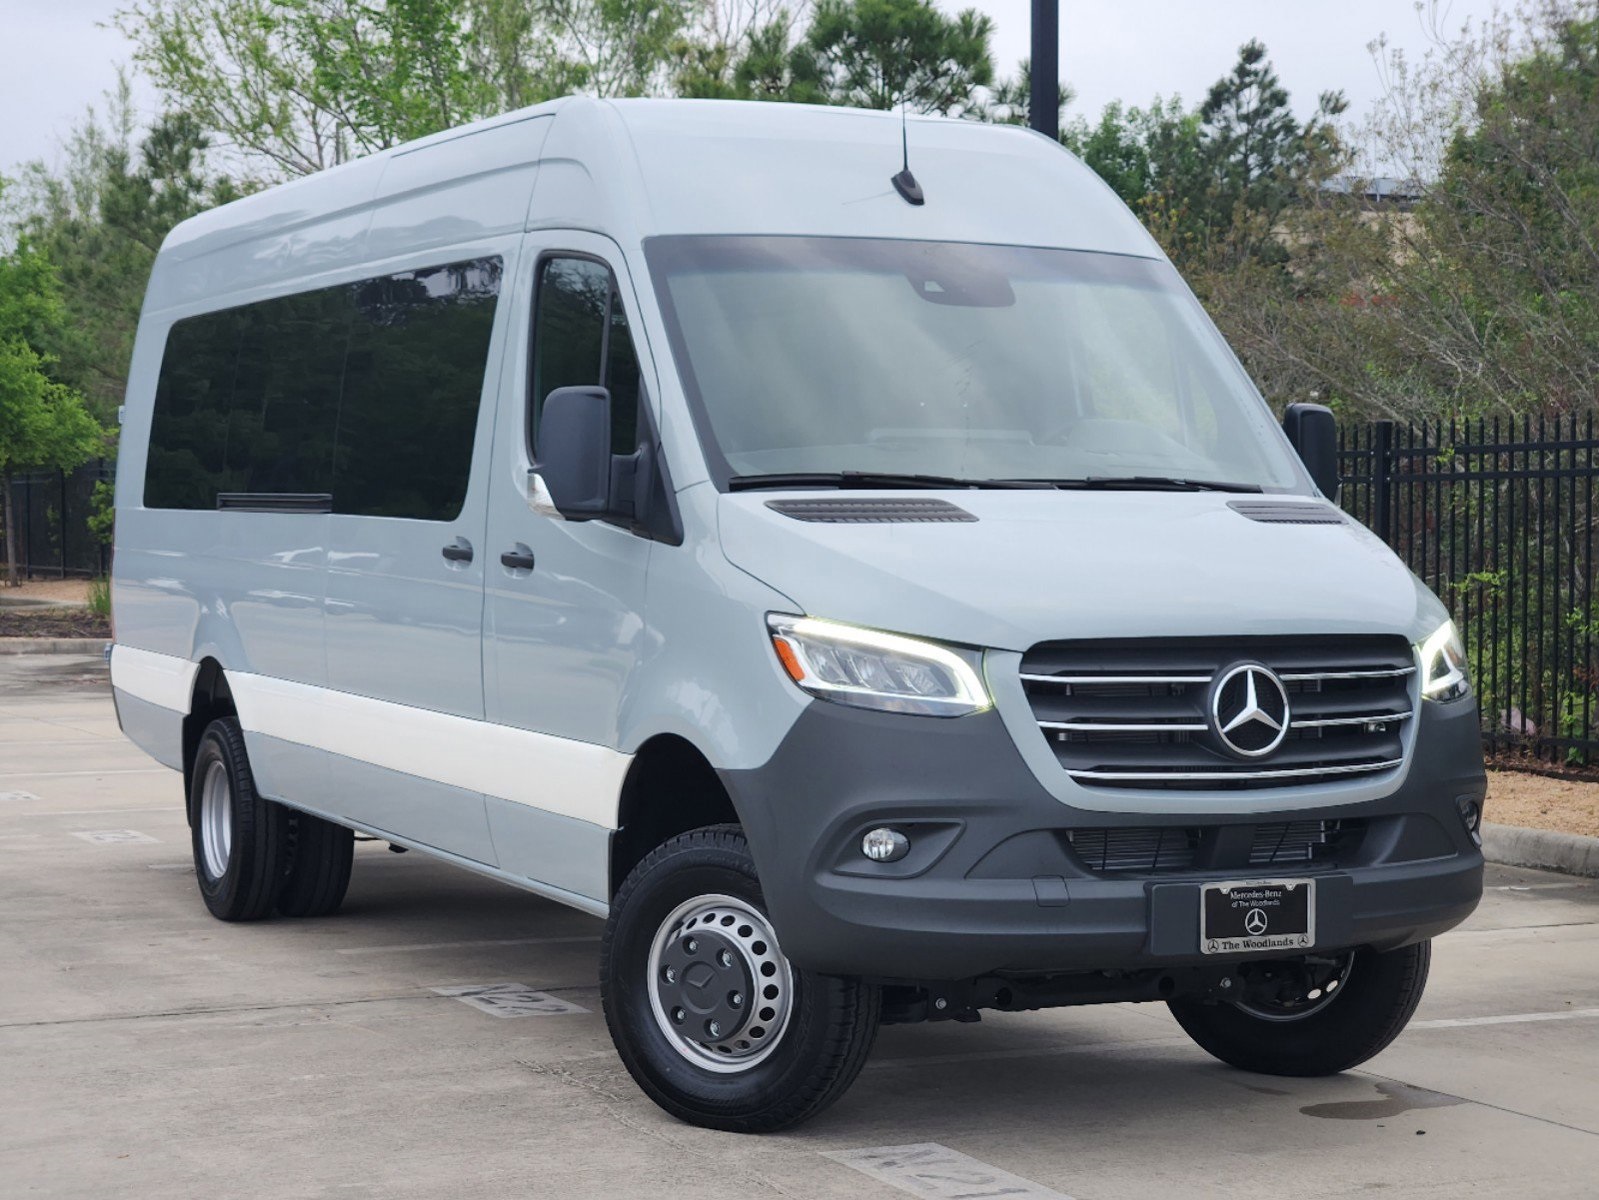 Pre-Owned 2022 Mercedes-Benz Sprinter 3500 in The Woodlands #P444263 |  Mercedes-Benz of The Woodlands